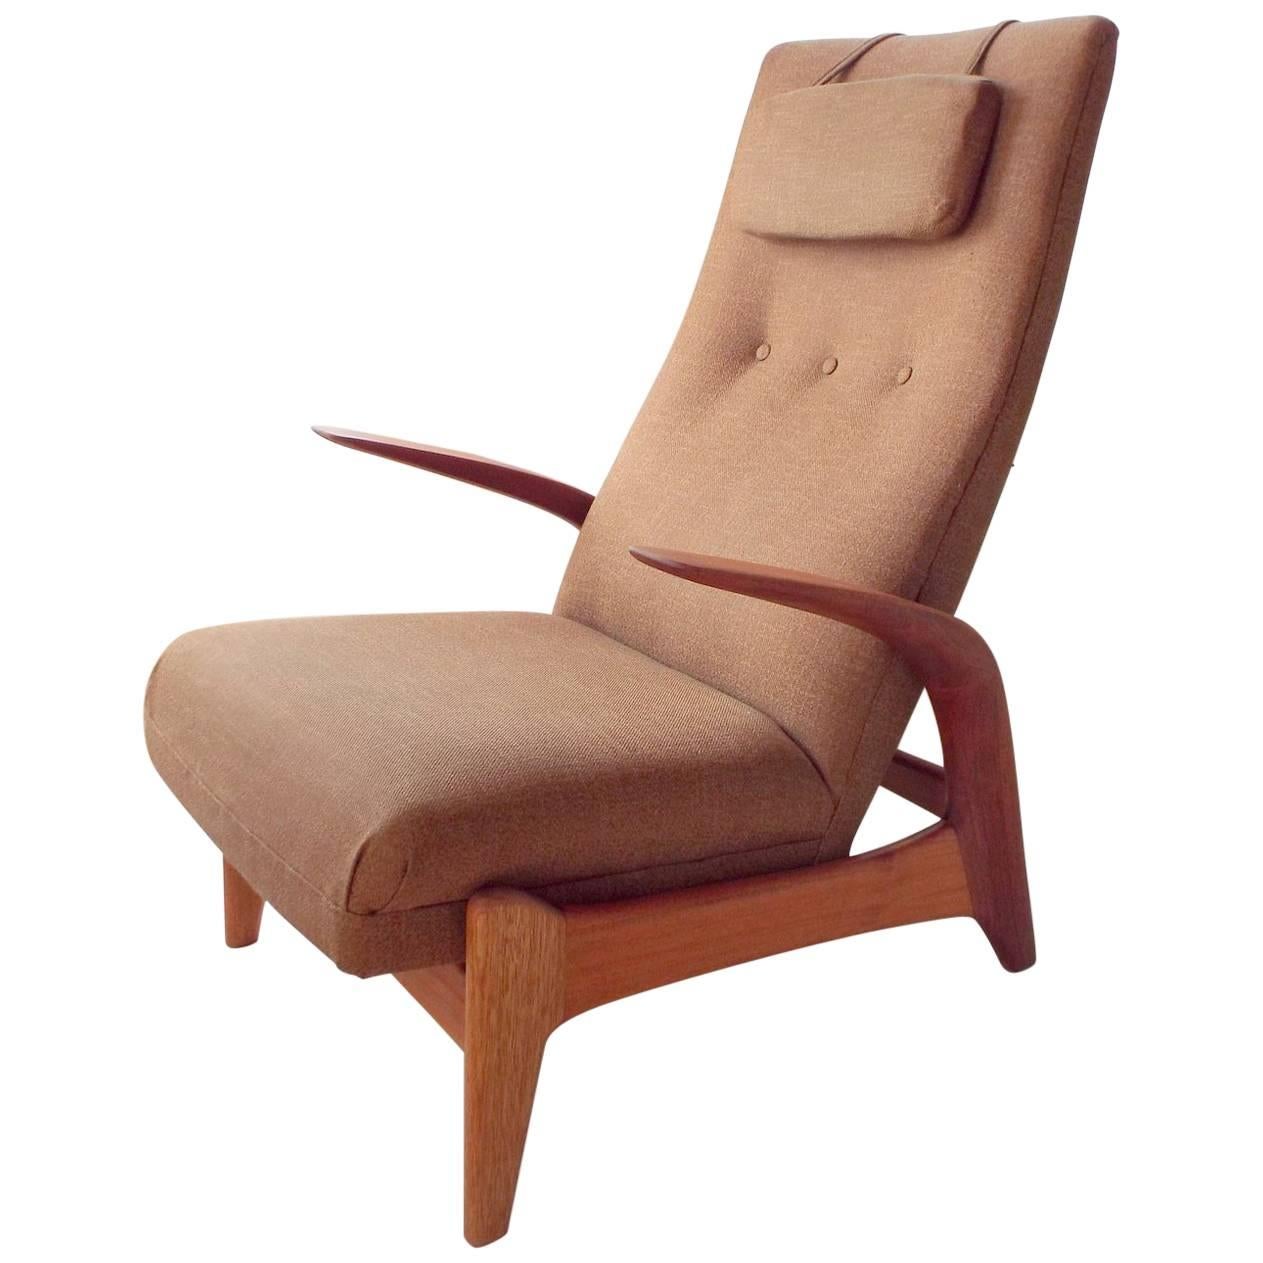 1960s Gimson & Slater Rock'n'rest Lounge Chair with Original Twill Upholstery For Sale